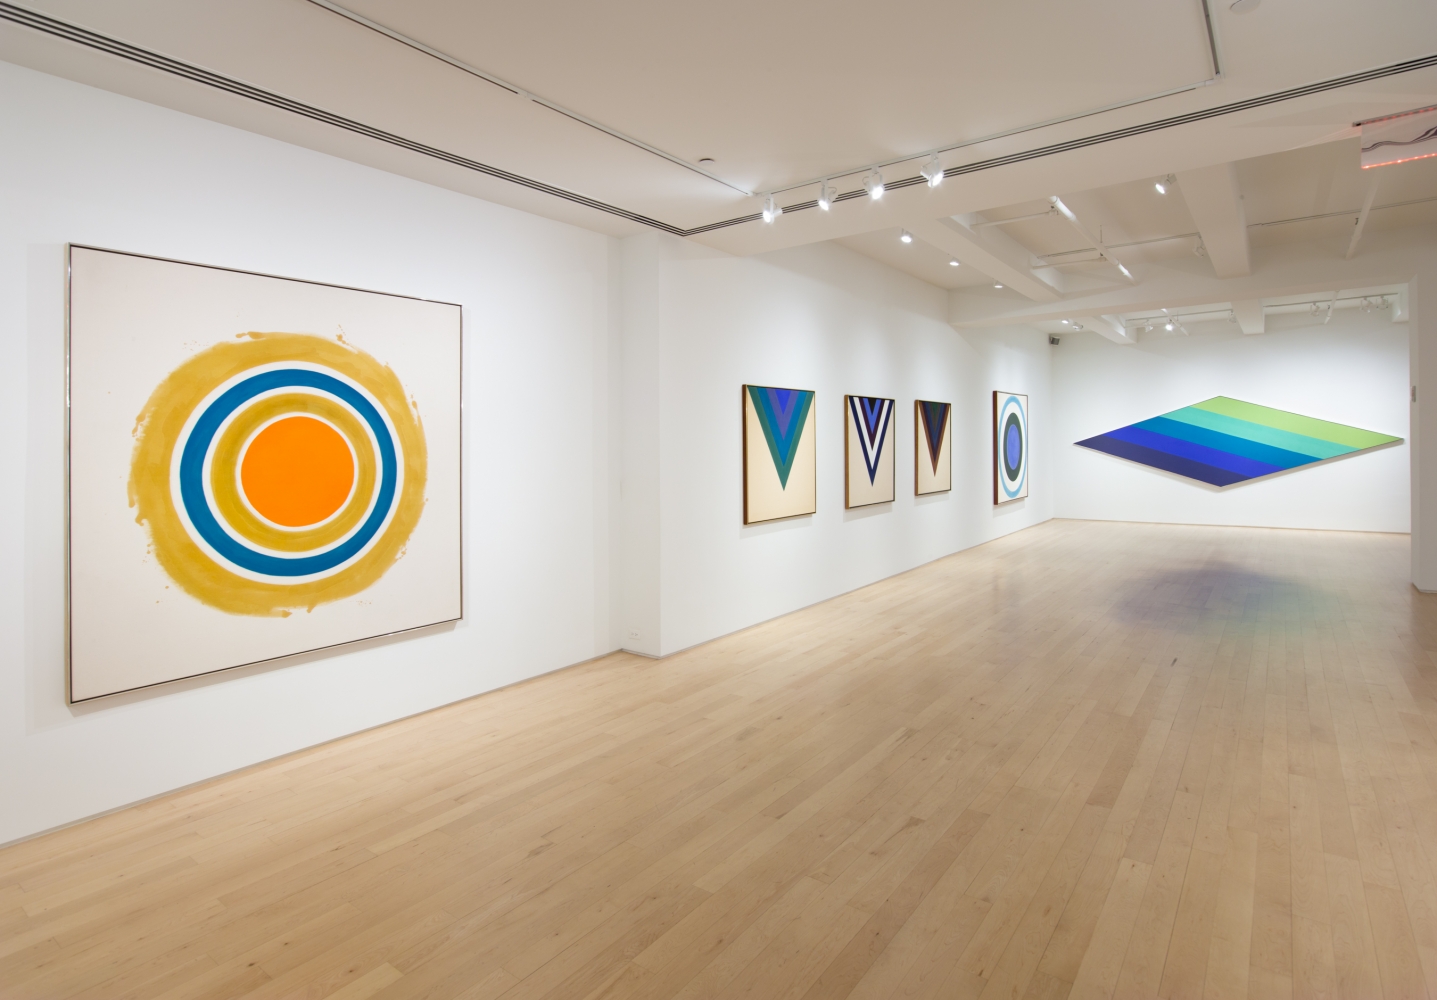 Kenneth Noland: Context is the Key